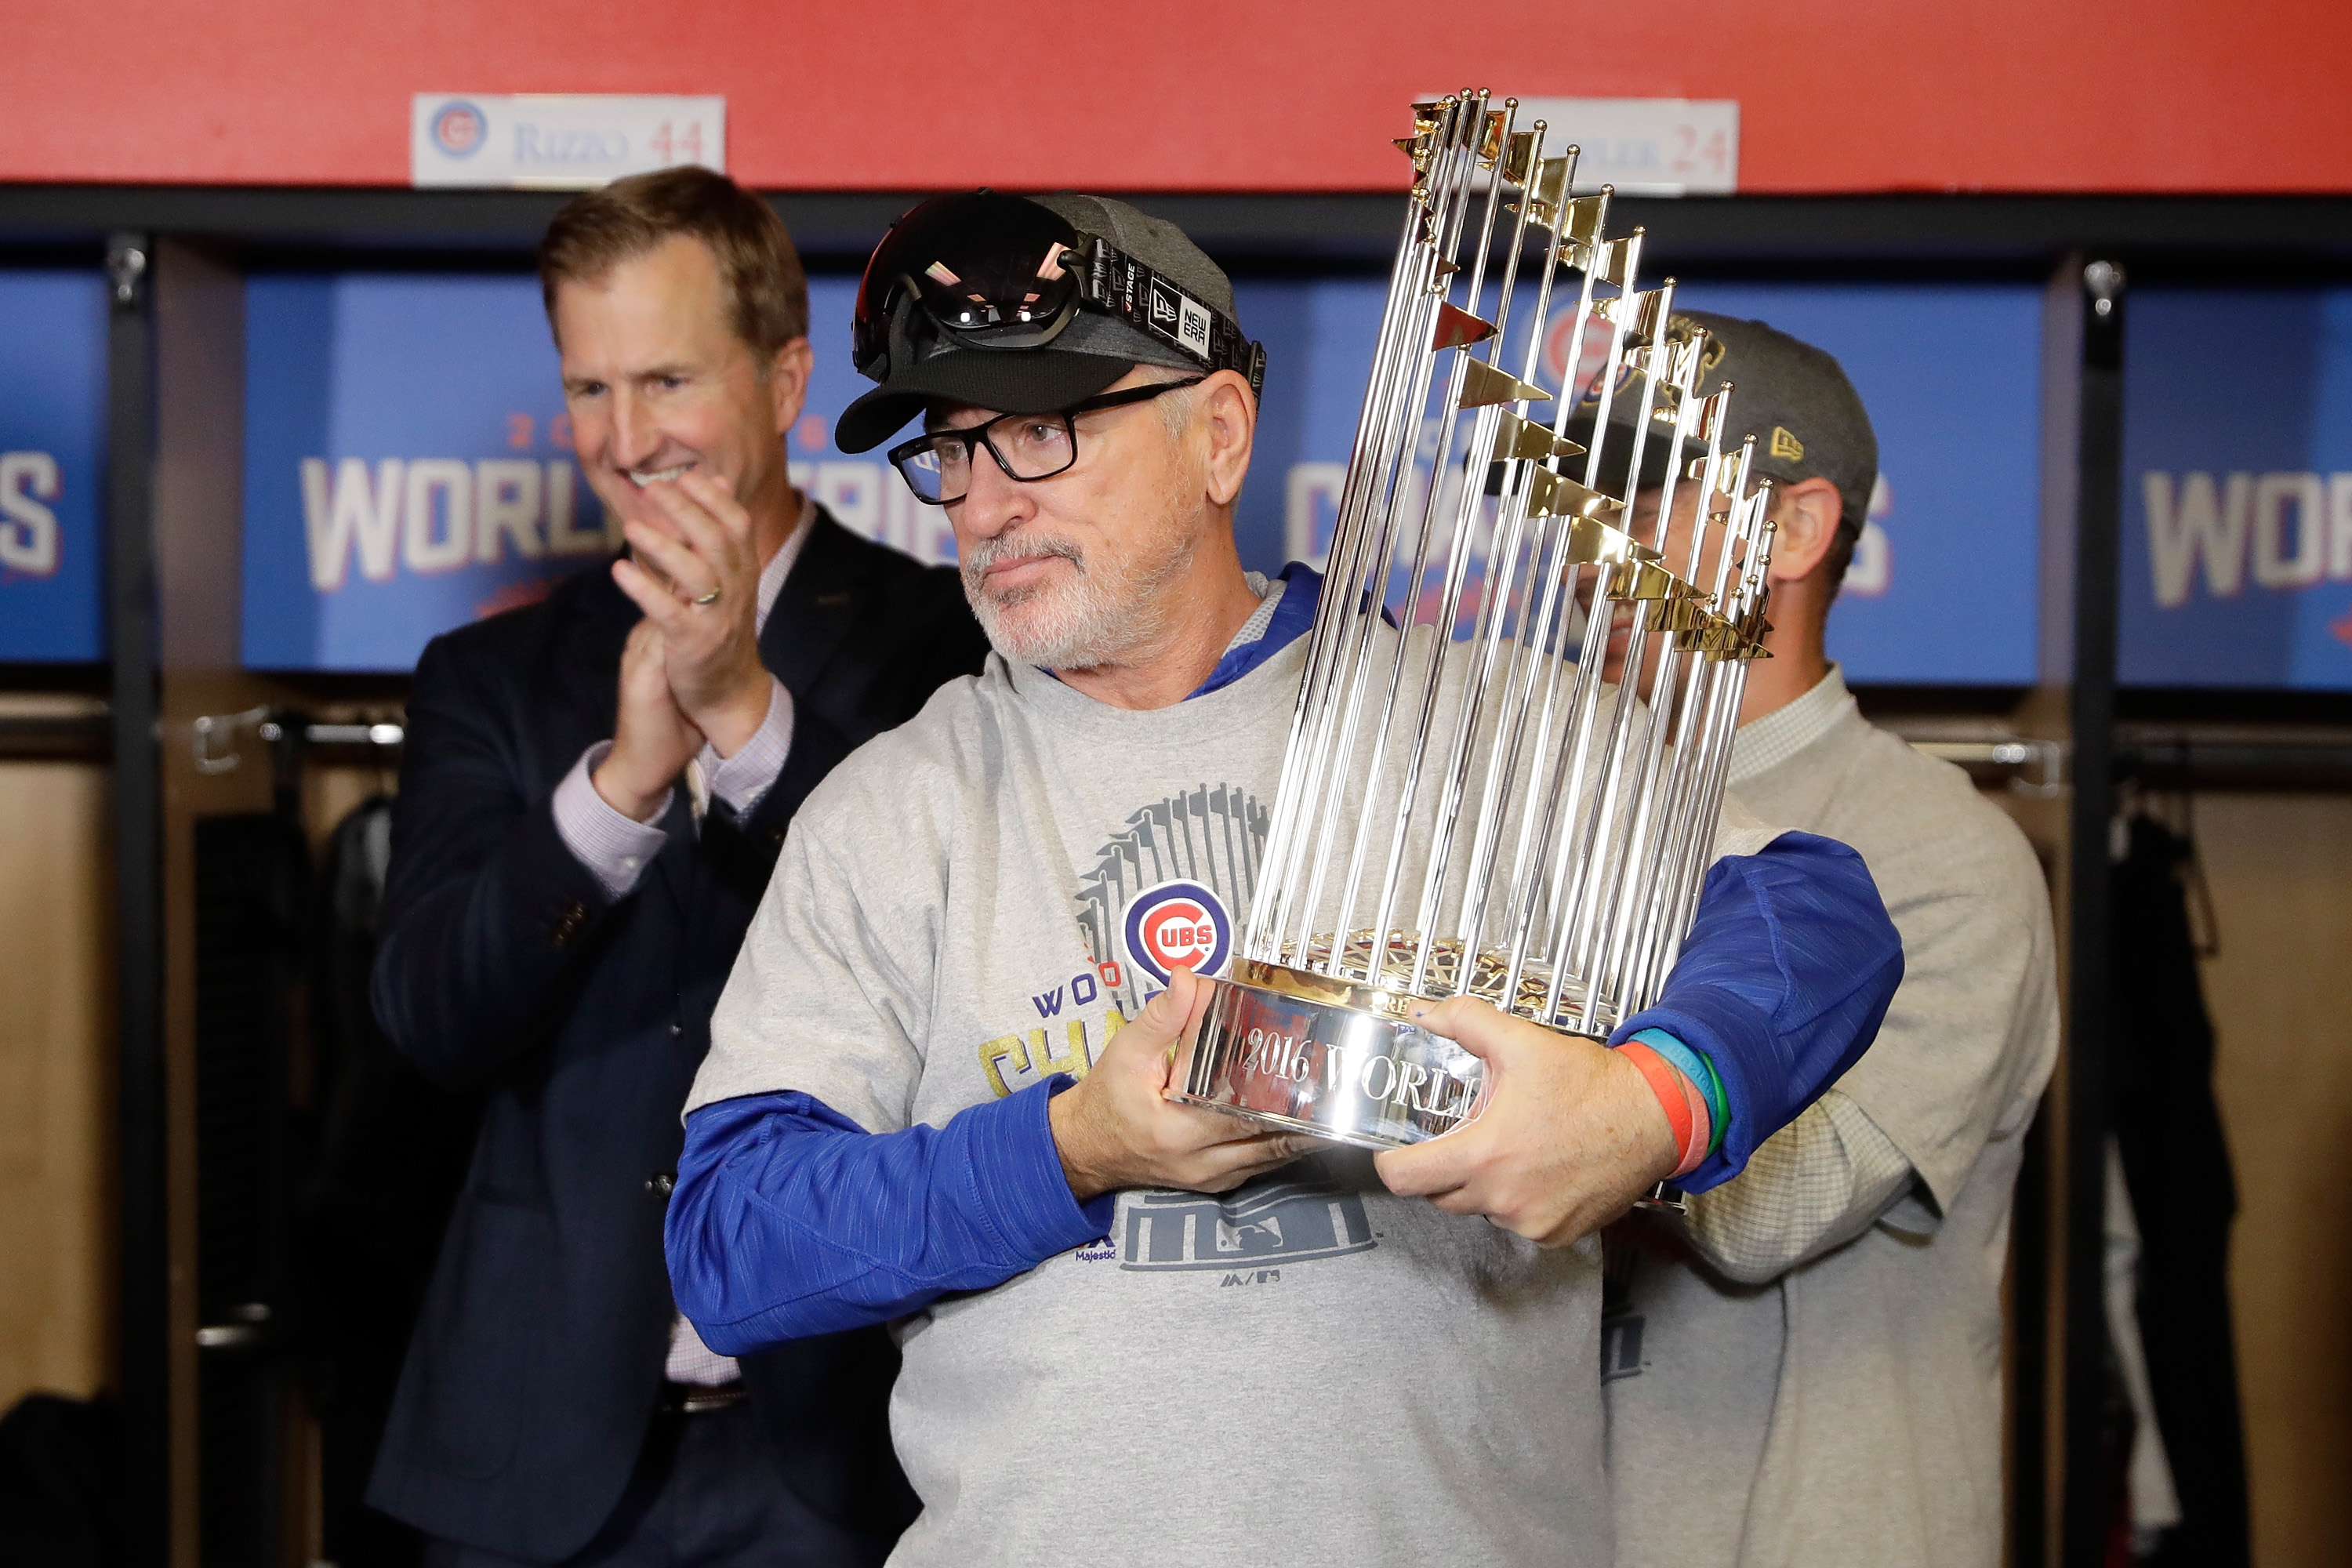 Joe Maddon reacts with The Commissioner's Trophy after the Chicago Cubs defeated the Cleveland Indians 8-7 in Game Seven of the 2016 World Series. (Photo by David J. Phillip-Pool/Getty Images)